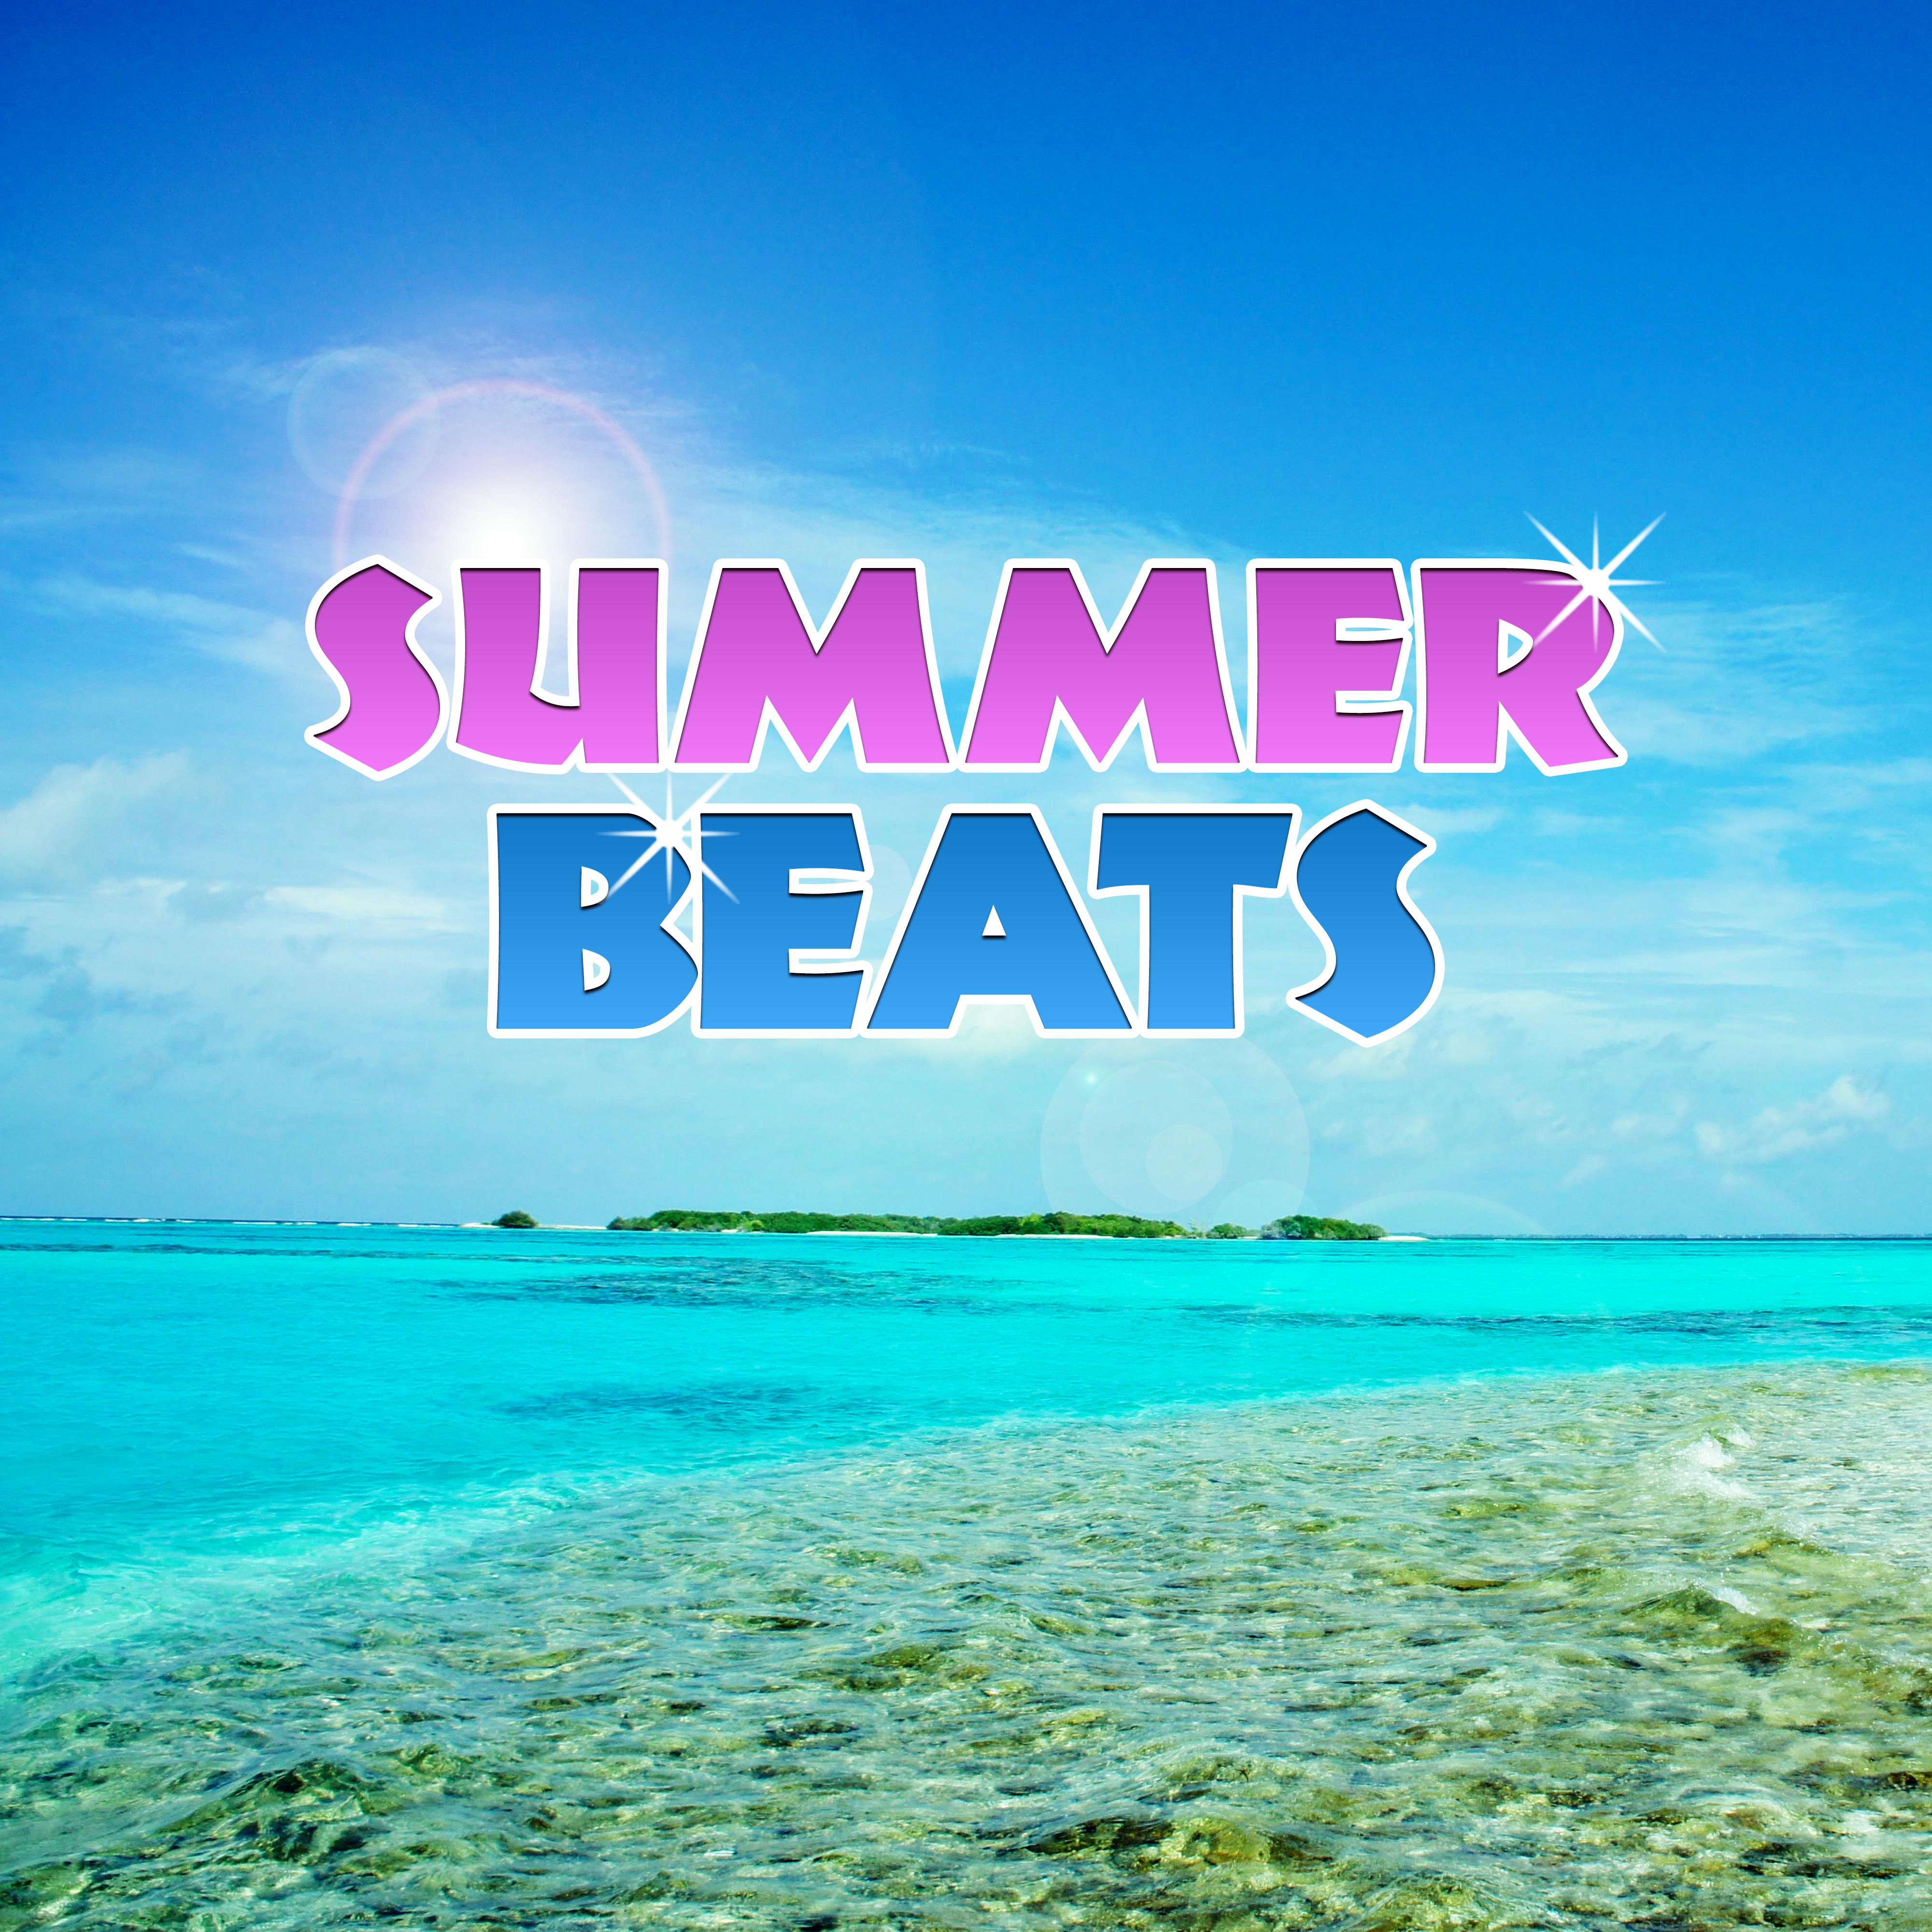 Summer Beats – Ibiza Summertime, Paradise Beach, Summer Chill, Ambient Music, Hotel Lounge, Sexy Vibes